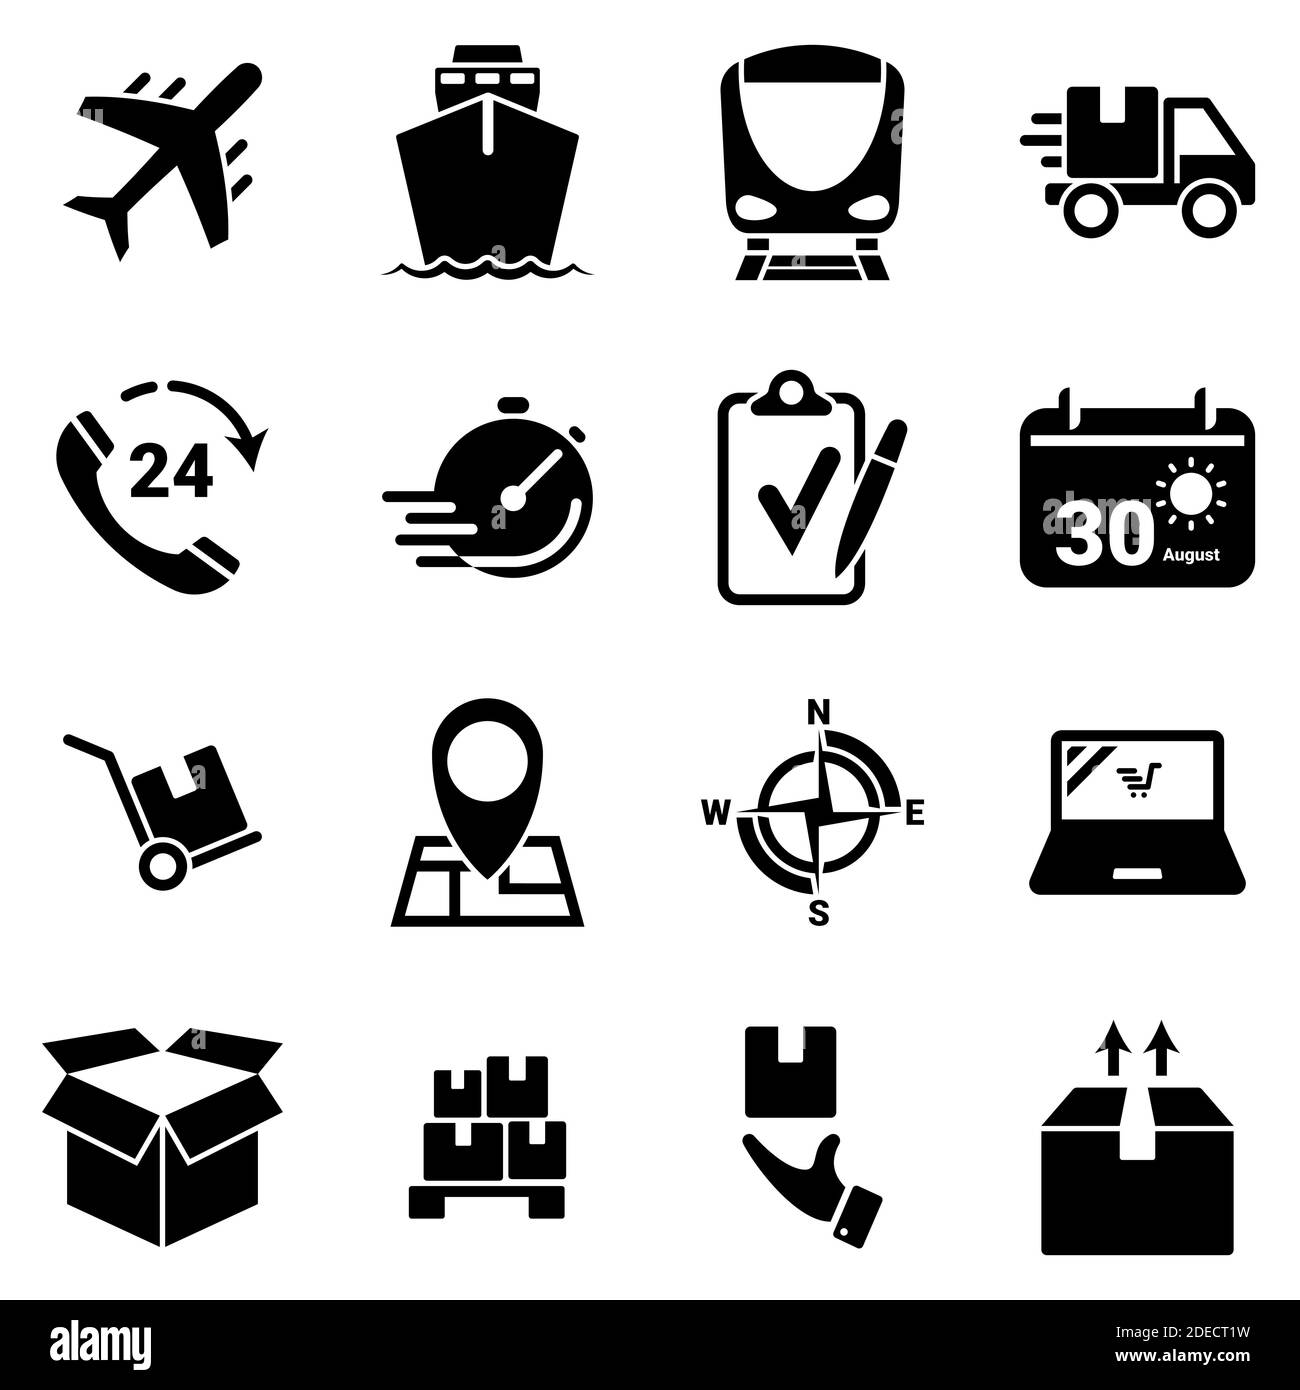 Set of simple icons on a theme Transportation, logistics, cargo, vector, design, flat, sign, symbol,element, object, illustration. Black icons isolate Stock Vector